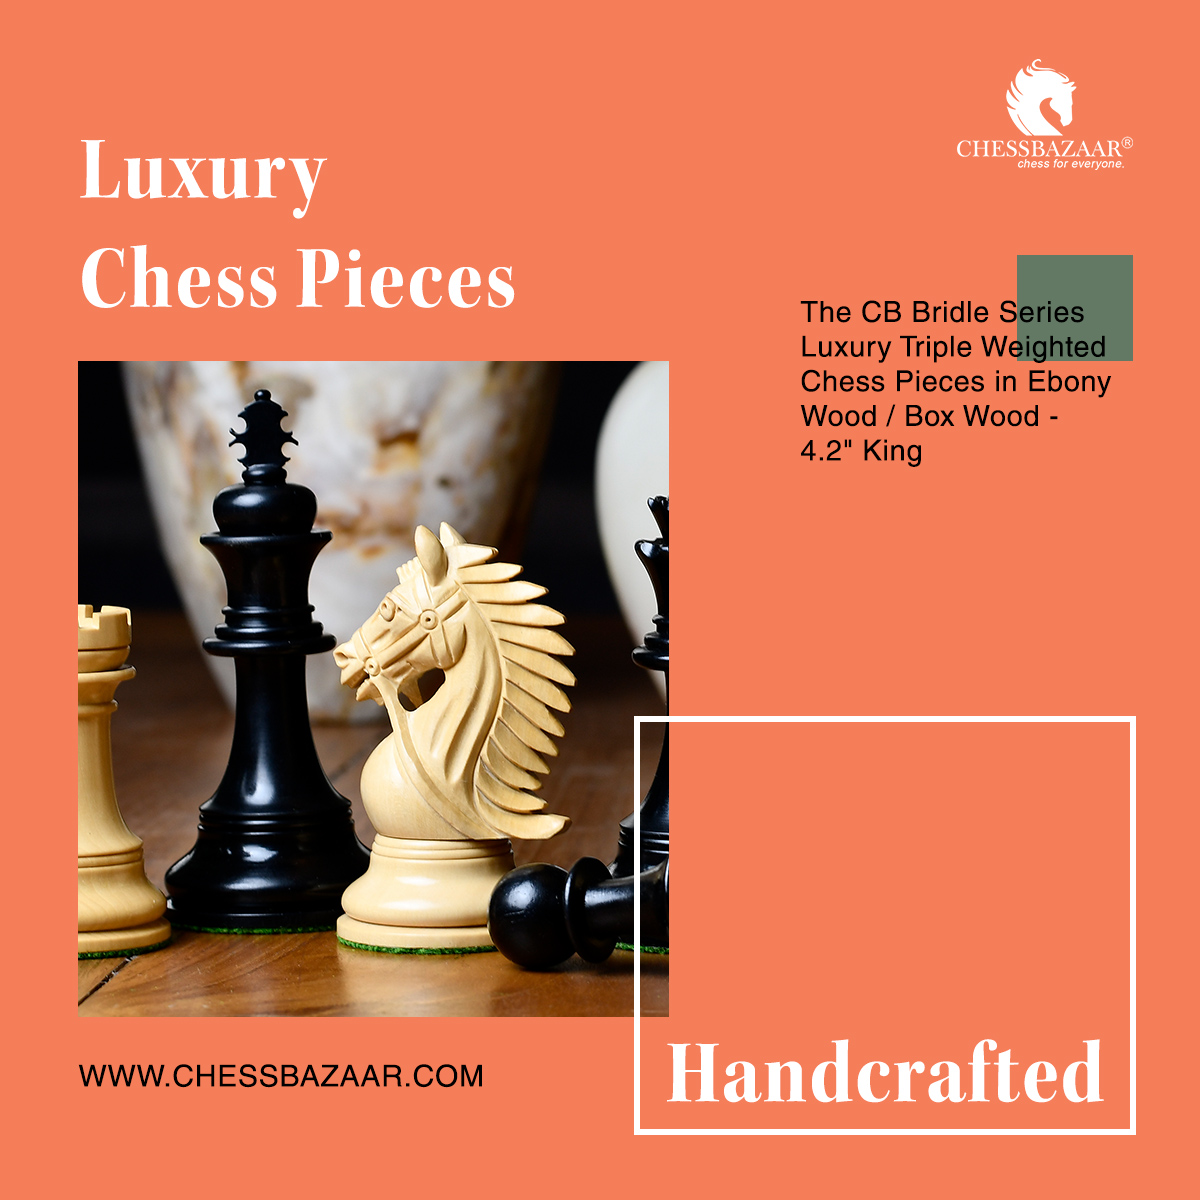 Enjoy Extra 35% off on Luxury Chess pieces 
Use code: 'STORE35' 

Shop now: chessbazaar.com/chess-pieces/l…

#chess #luxurychesspiece #chesspieces #chesssale #chesssets #boardgame #sport #storewidesale